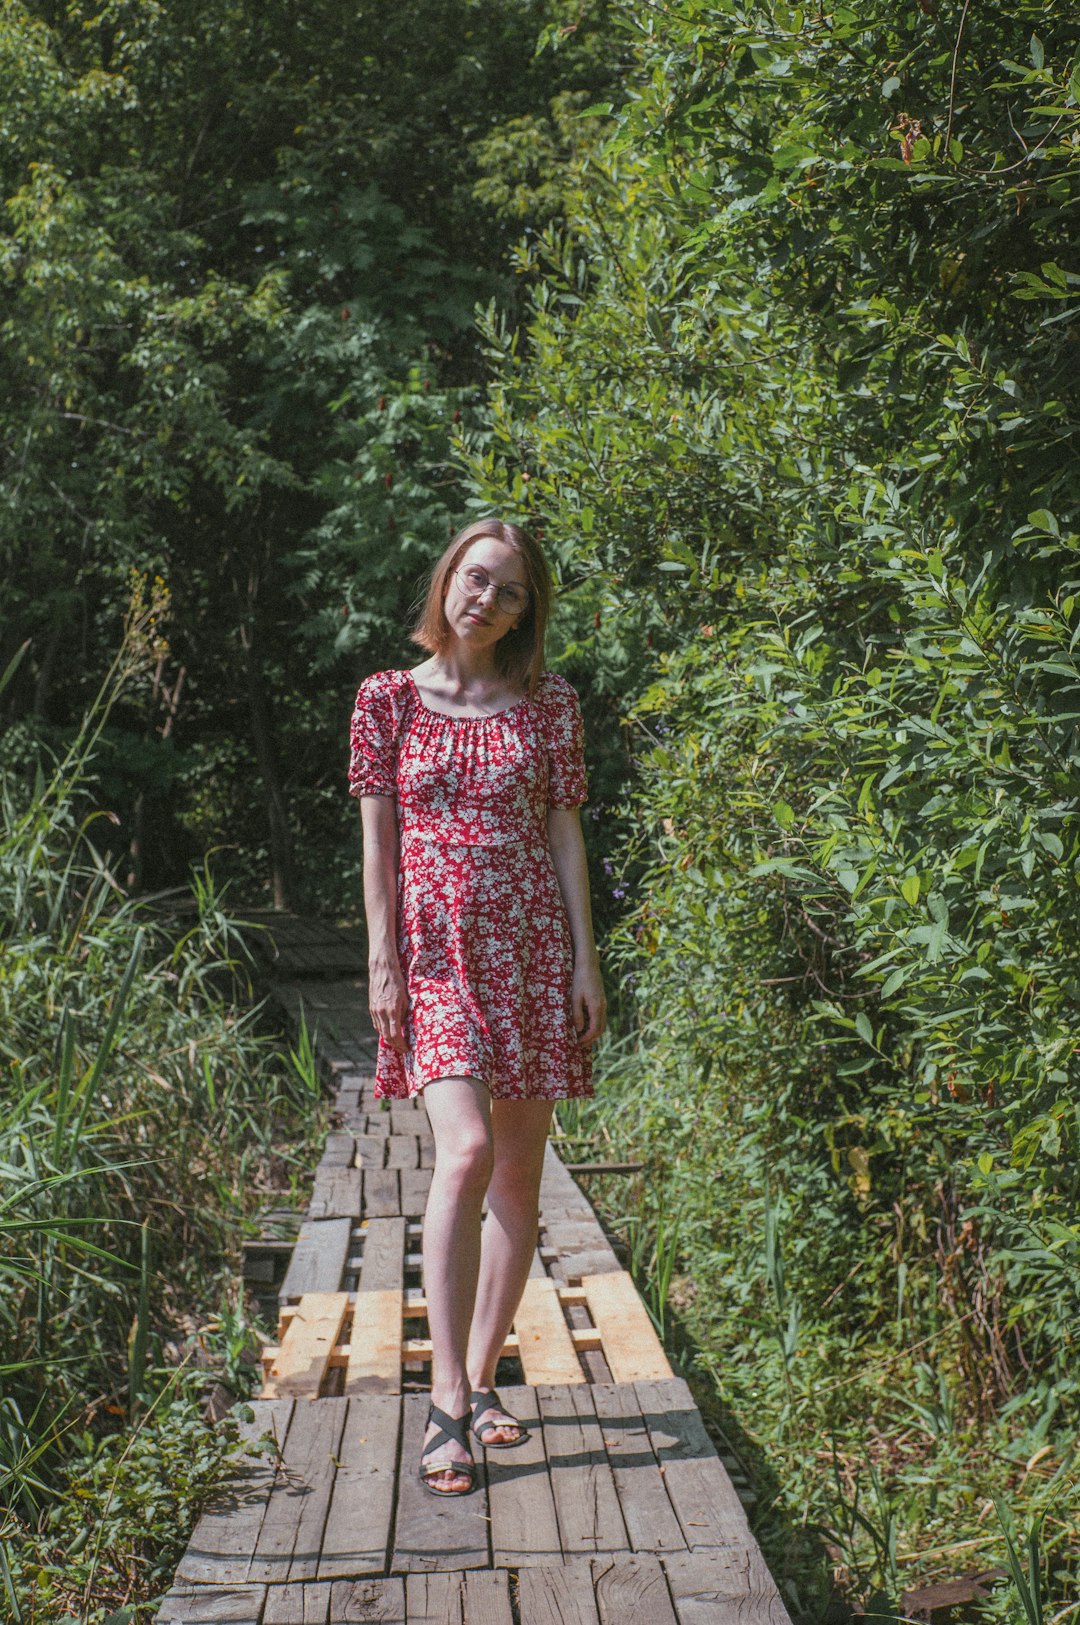 woman in purple and white floral dress standing on wooden pathway surrounded by green plants during